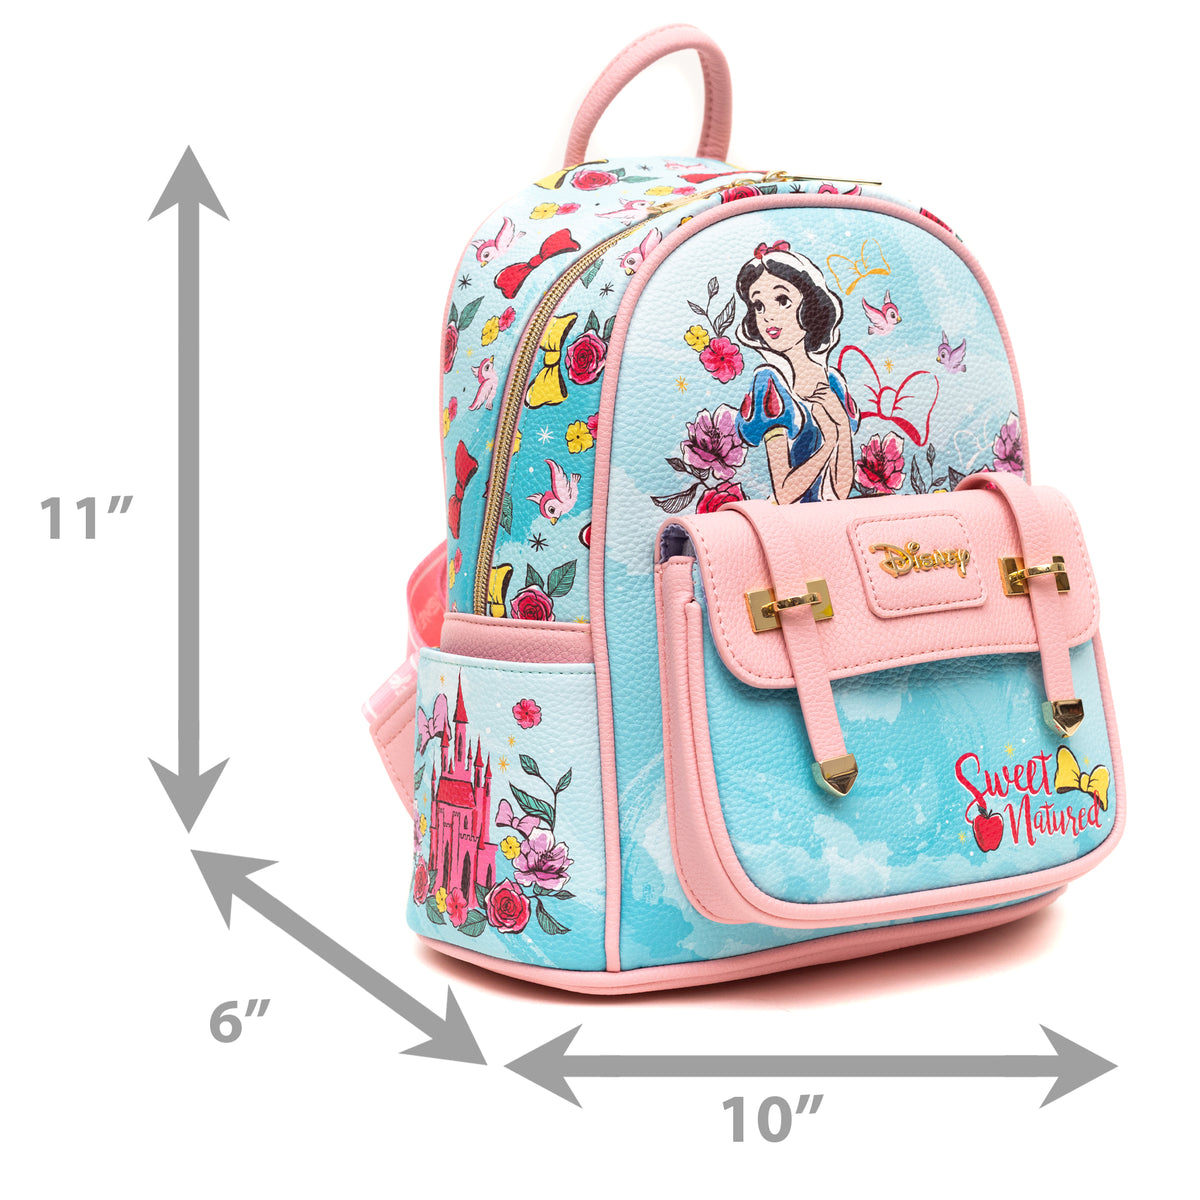 Disney Snow White and the Seven Dwarfs Mini Backpack - Limited Edition